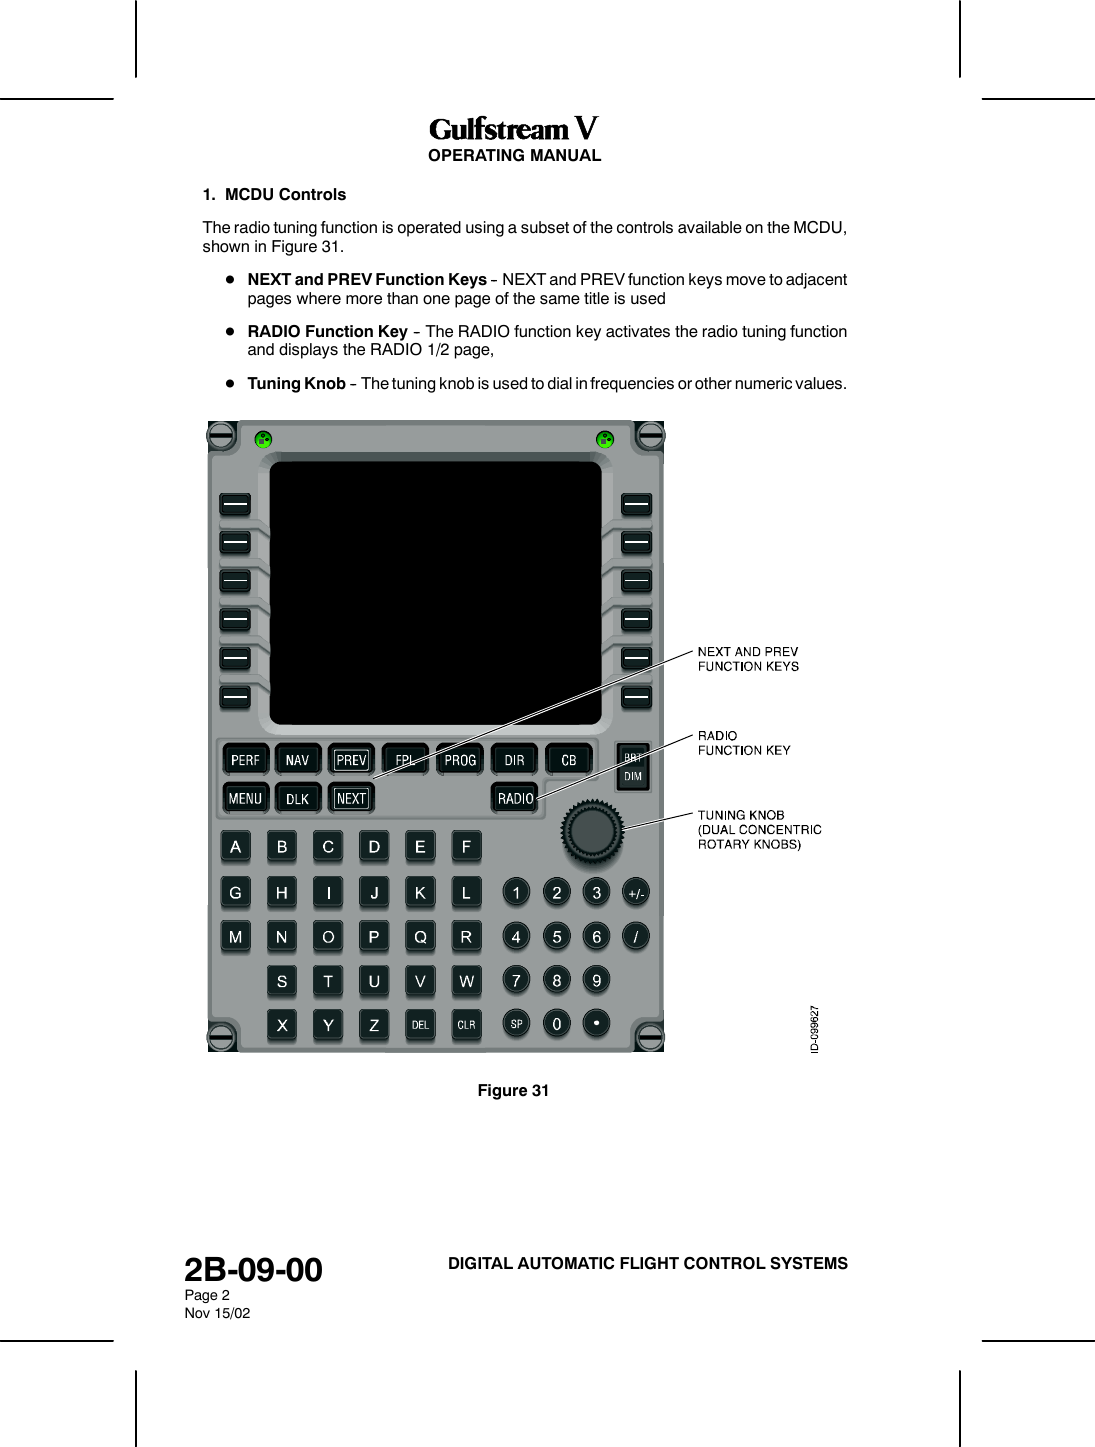 OPERATING MANUAL2B-09-00Page 2Nov 15/02DIGITAL AUTOMATIC FLIGHT CONTROL SYSTEMS1. MCDU ControlsThe radio tuning function is operated using a subset of the controls available on the MCDU,shown in Figure 31.DNEXT and PREV Function Keys -- NEXT and PREV function keys move to adjacentpages where more than one page of the same title is usedDRADIO Function Key -- The RADIO function key activates the radio tuning functionand displays the RADIO 1/2 page,DTuning Knob -- The tuning knob is used to dial in frequencies or other numeric values.Figure 31